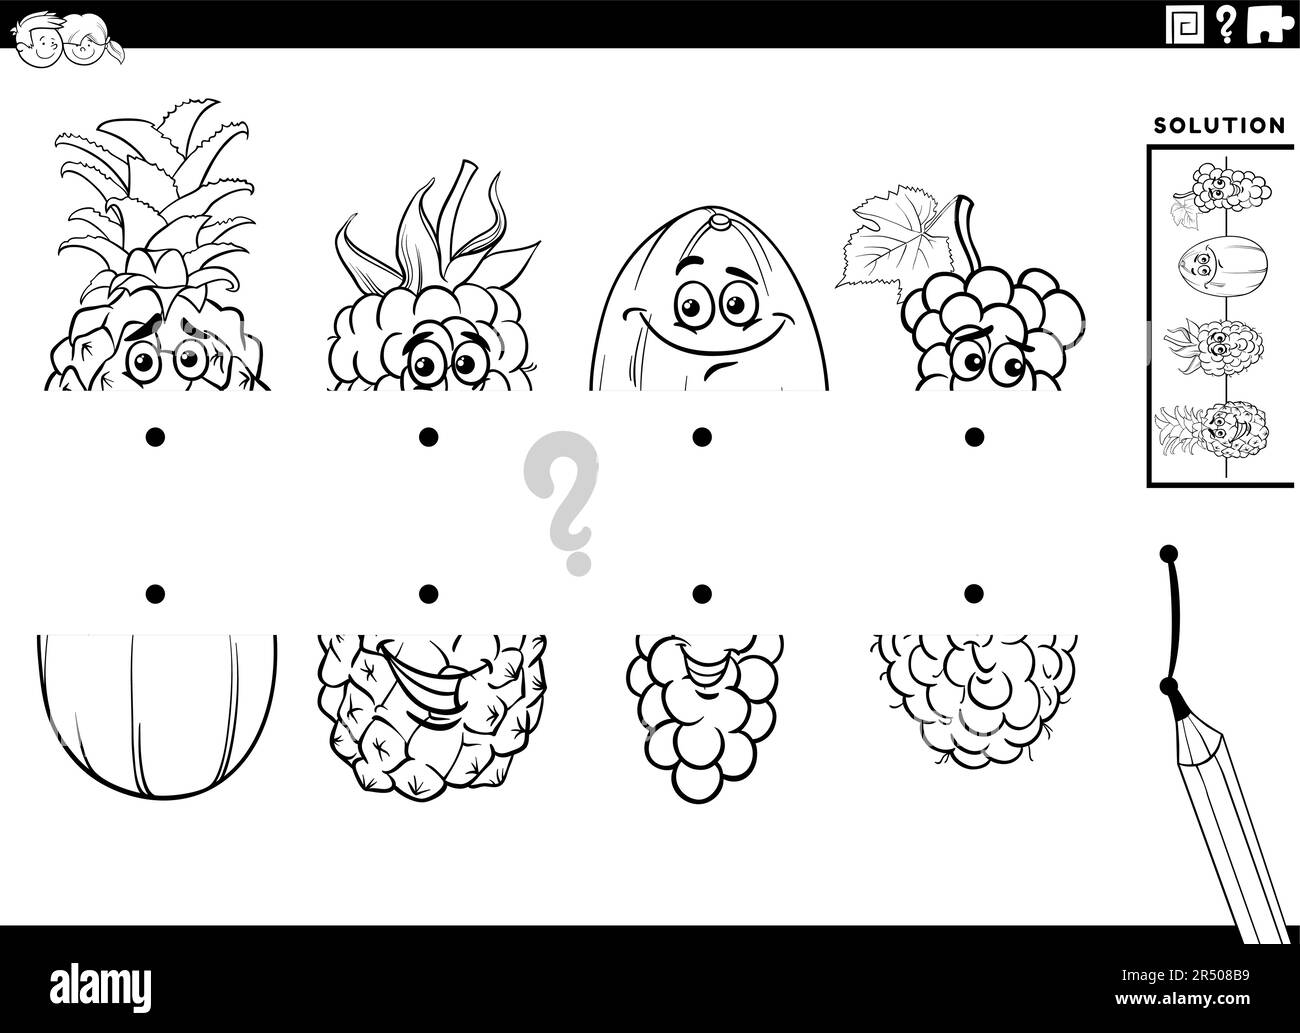 Black and white cartoon illustration of educational game of matching halves of pictures with fruit characters coloring page Stock Vector